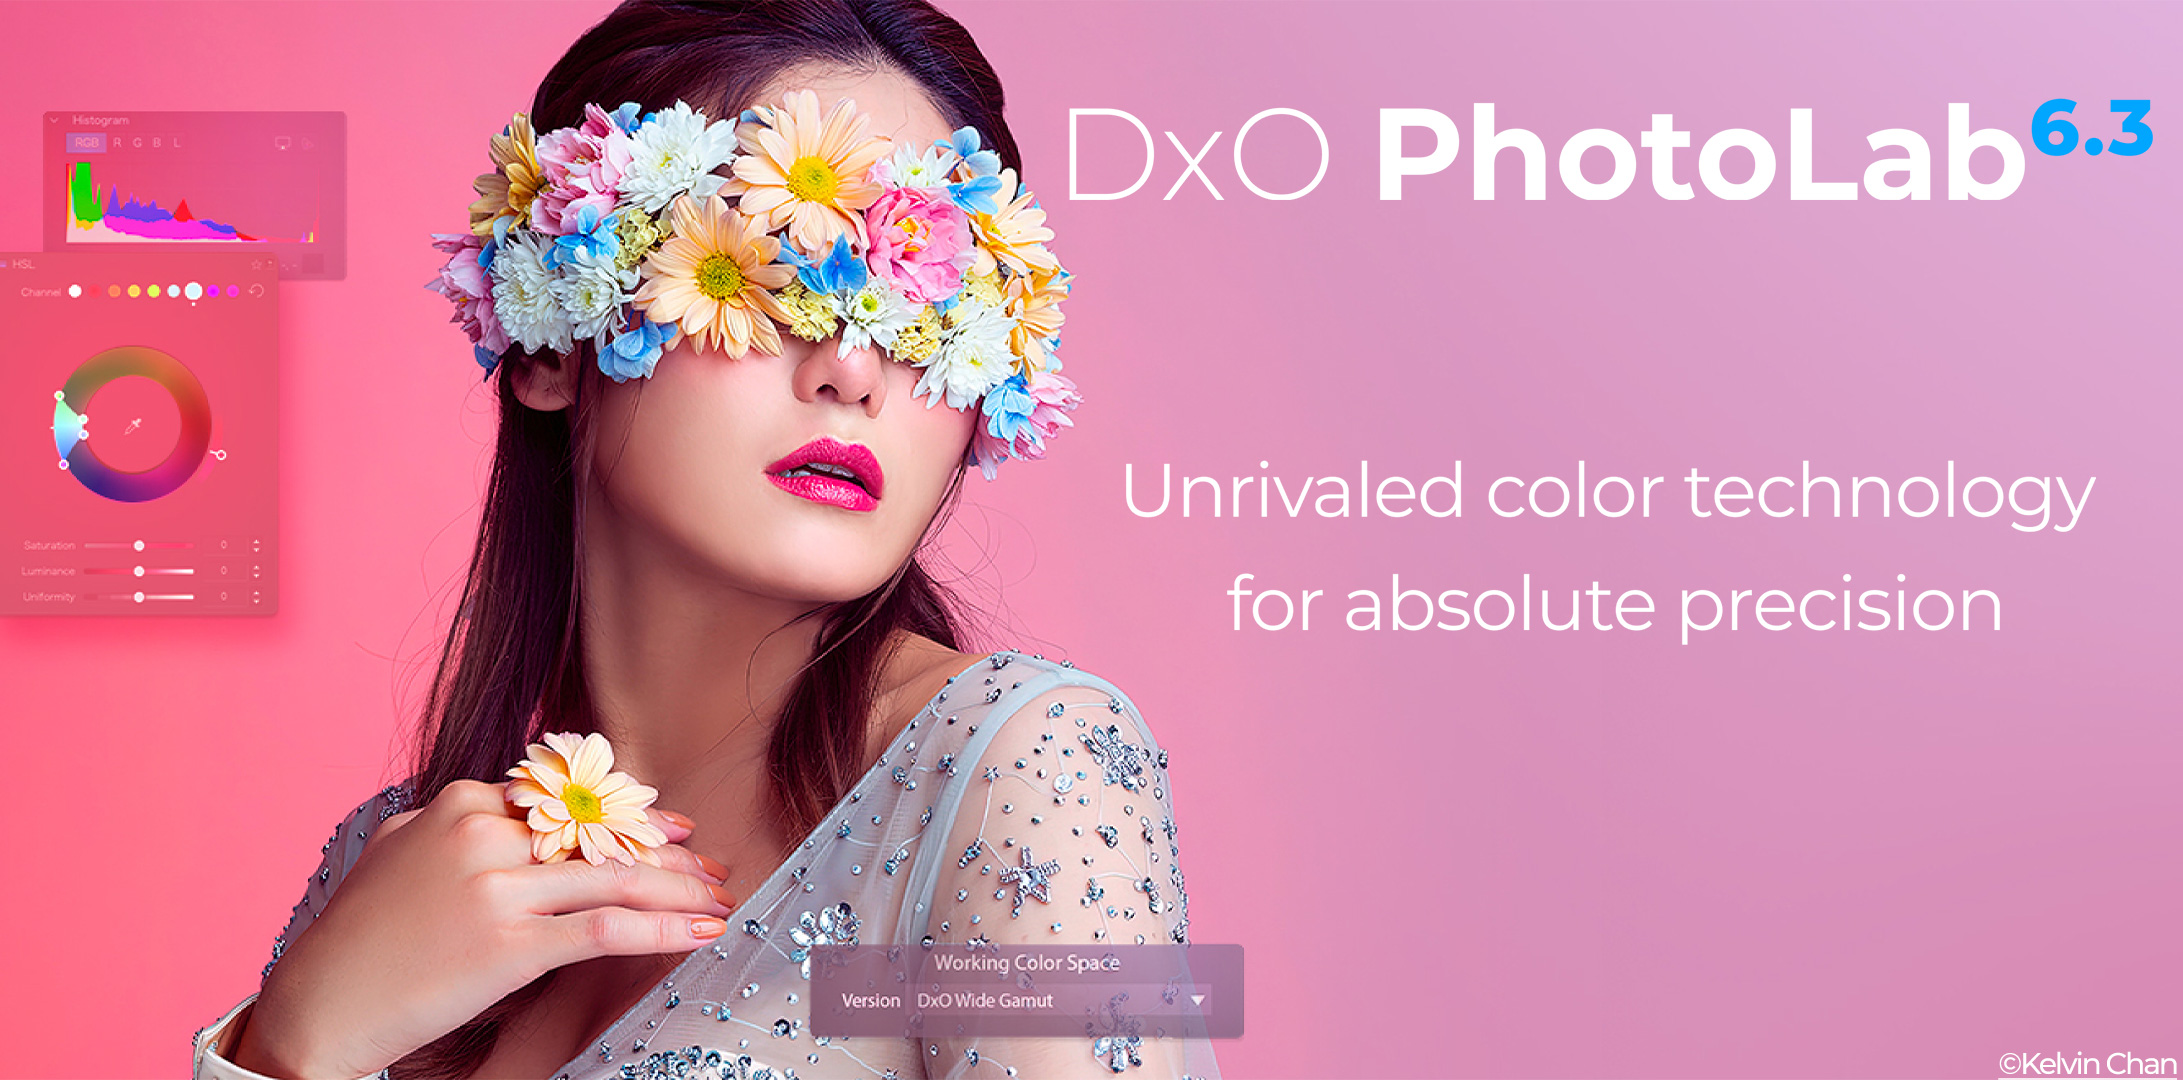 DxO PhotoLab 6.3 has new Wide Gamut and Soft proofing options